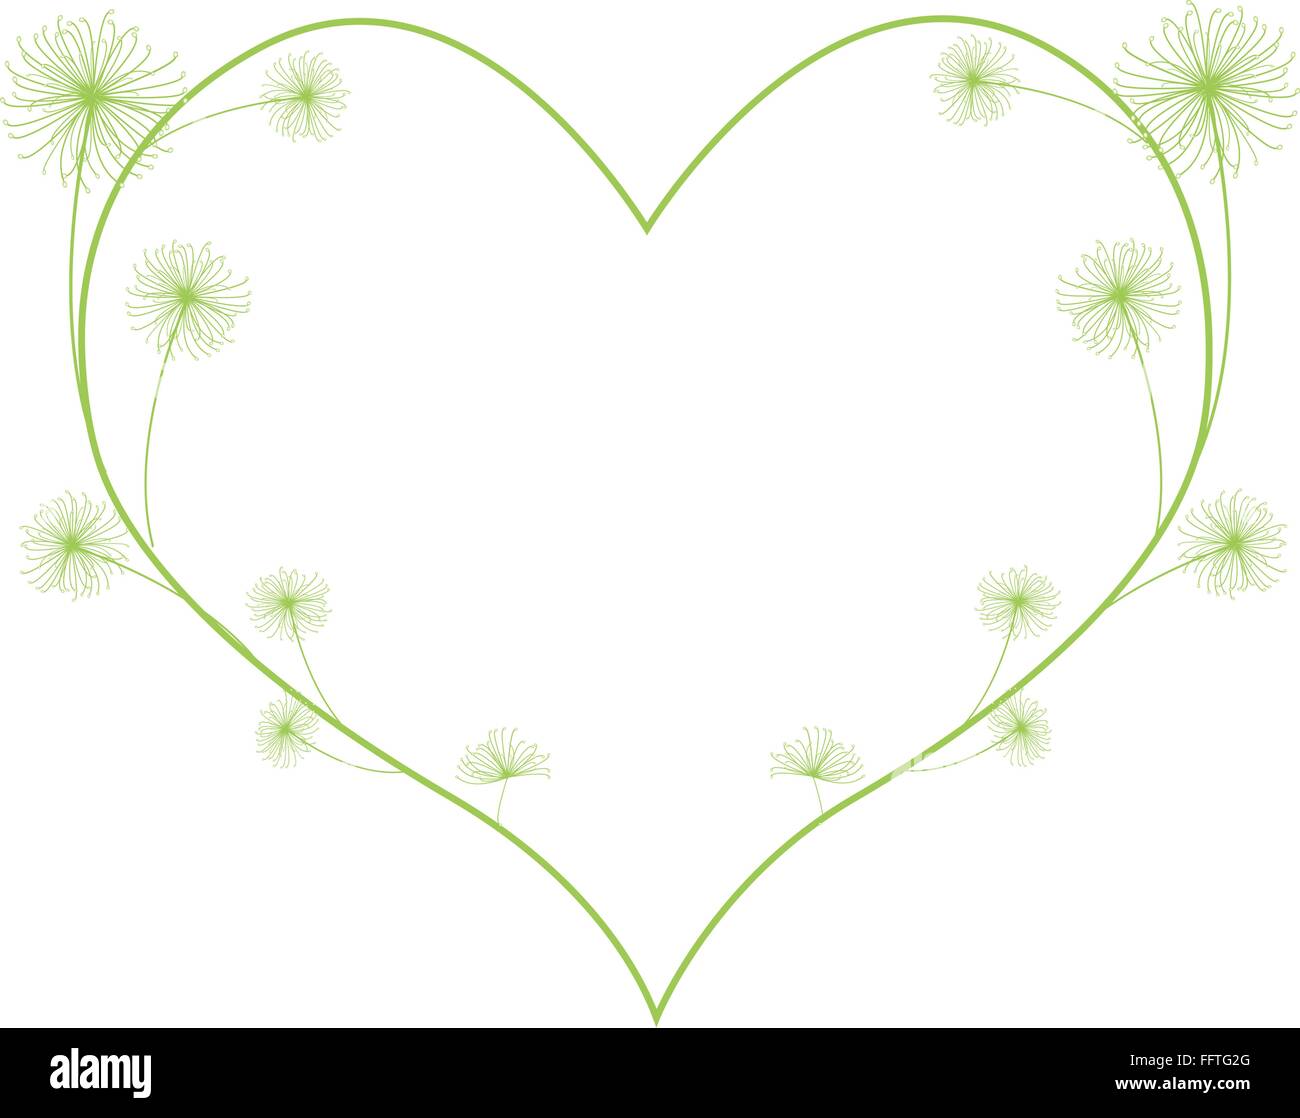 Love Concept, Illustration of Green Egyptian Cyperus Papyrus or Cyperaceae Plants Forming in Heart Shape Isolated on White Backg Stock Vector